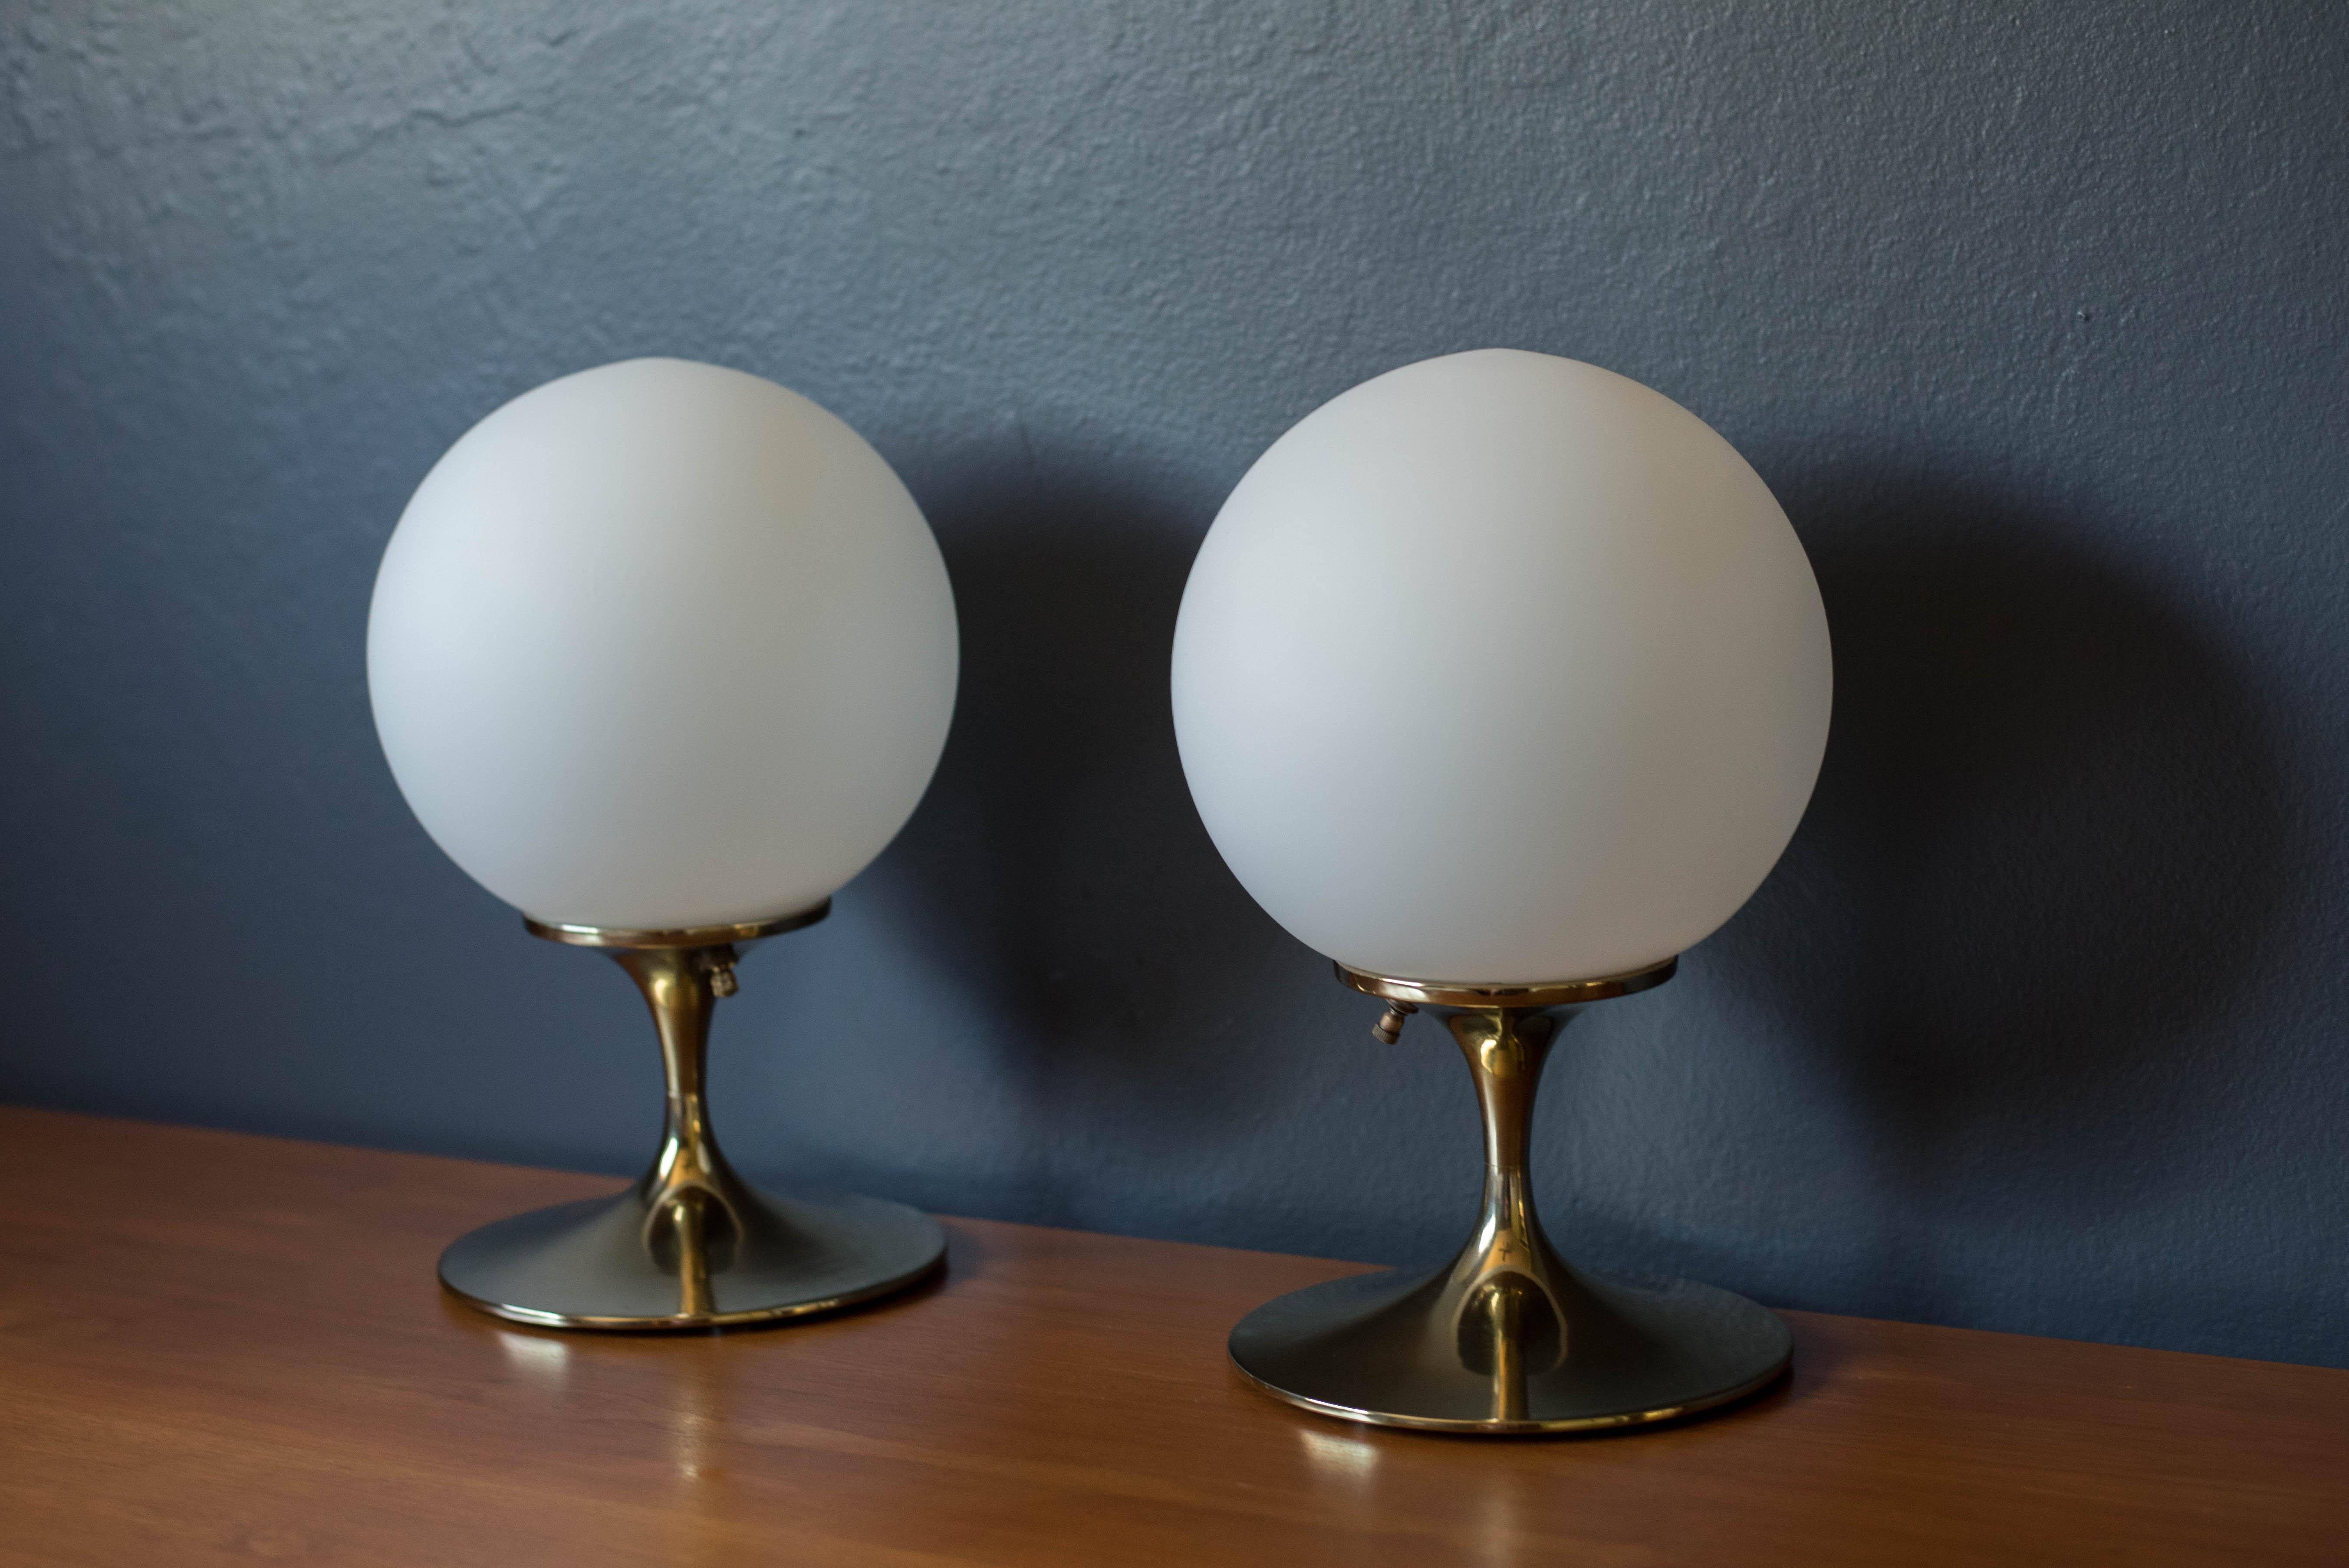 Mid century modern pair of accent table lamps in brass manufactured by Laurel Lamp Co. This set features a sculptural tulip base and illuminating white frosted glass globe shades. Price is for the pair.